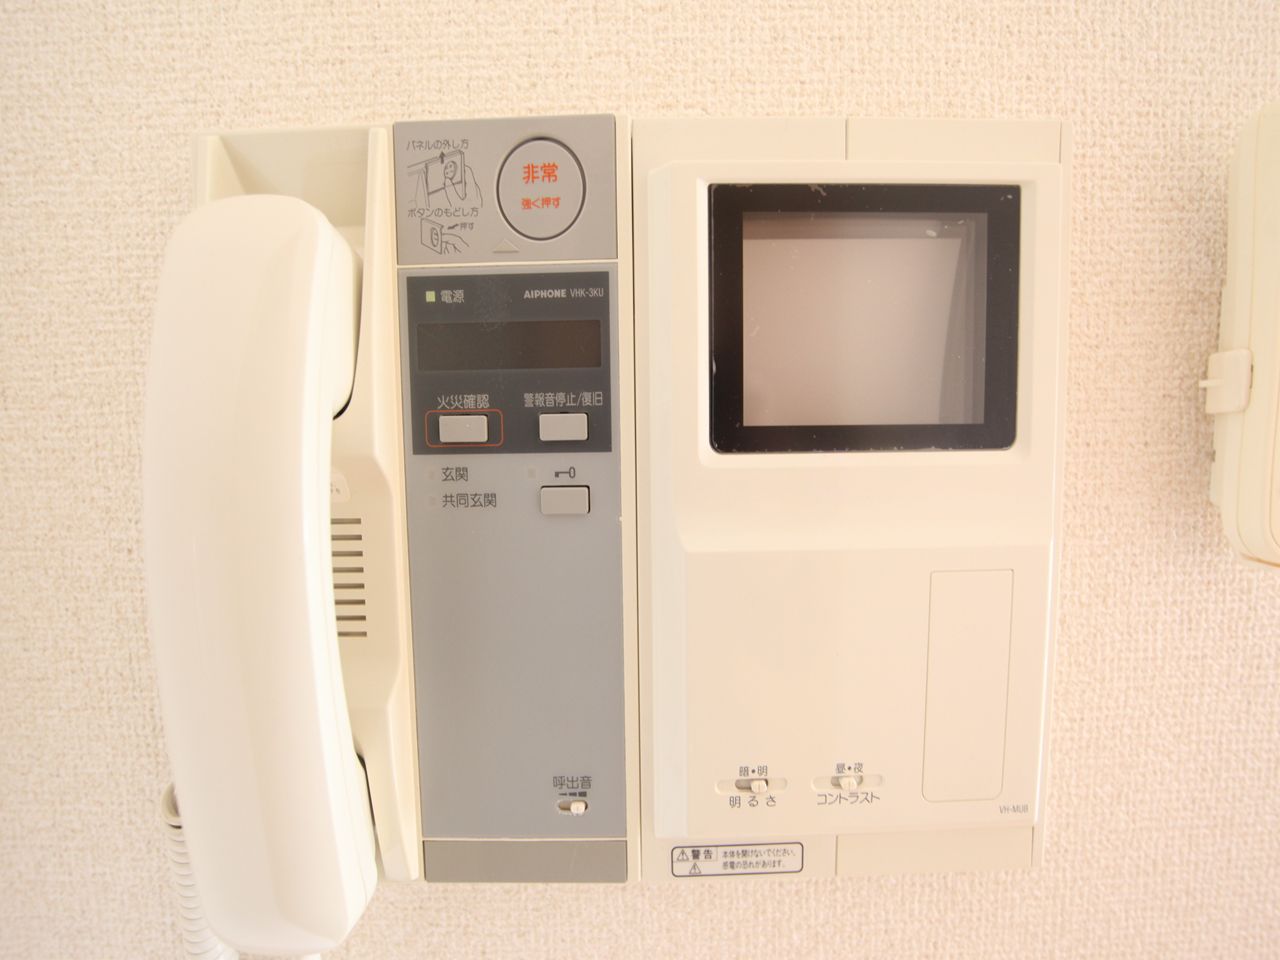 Security. Security Intercom with TV monitor